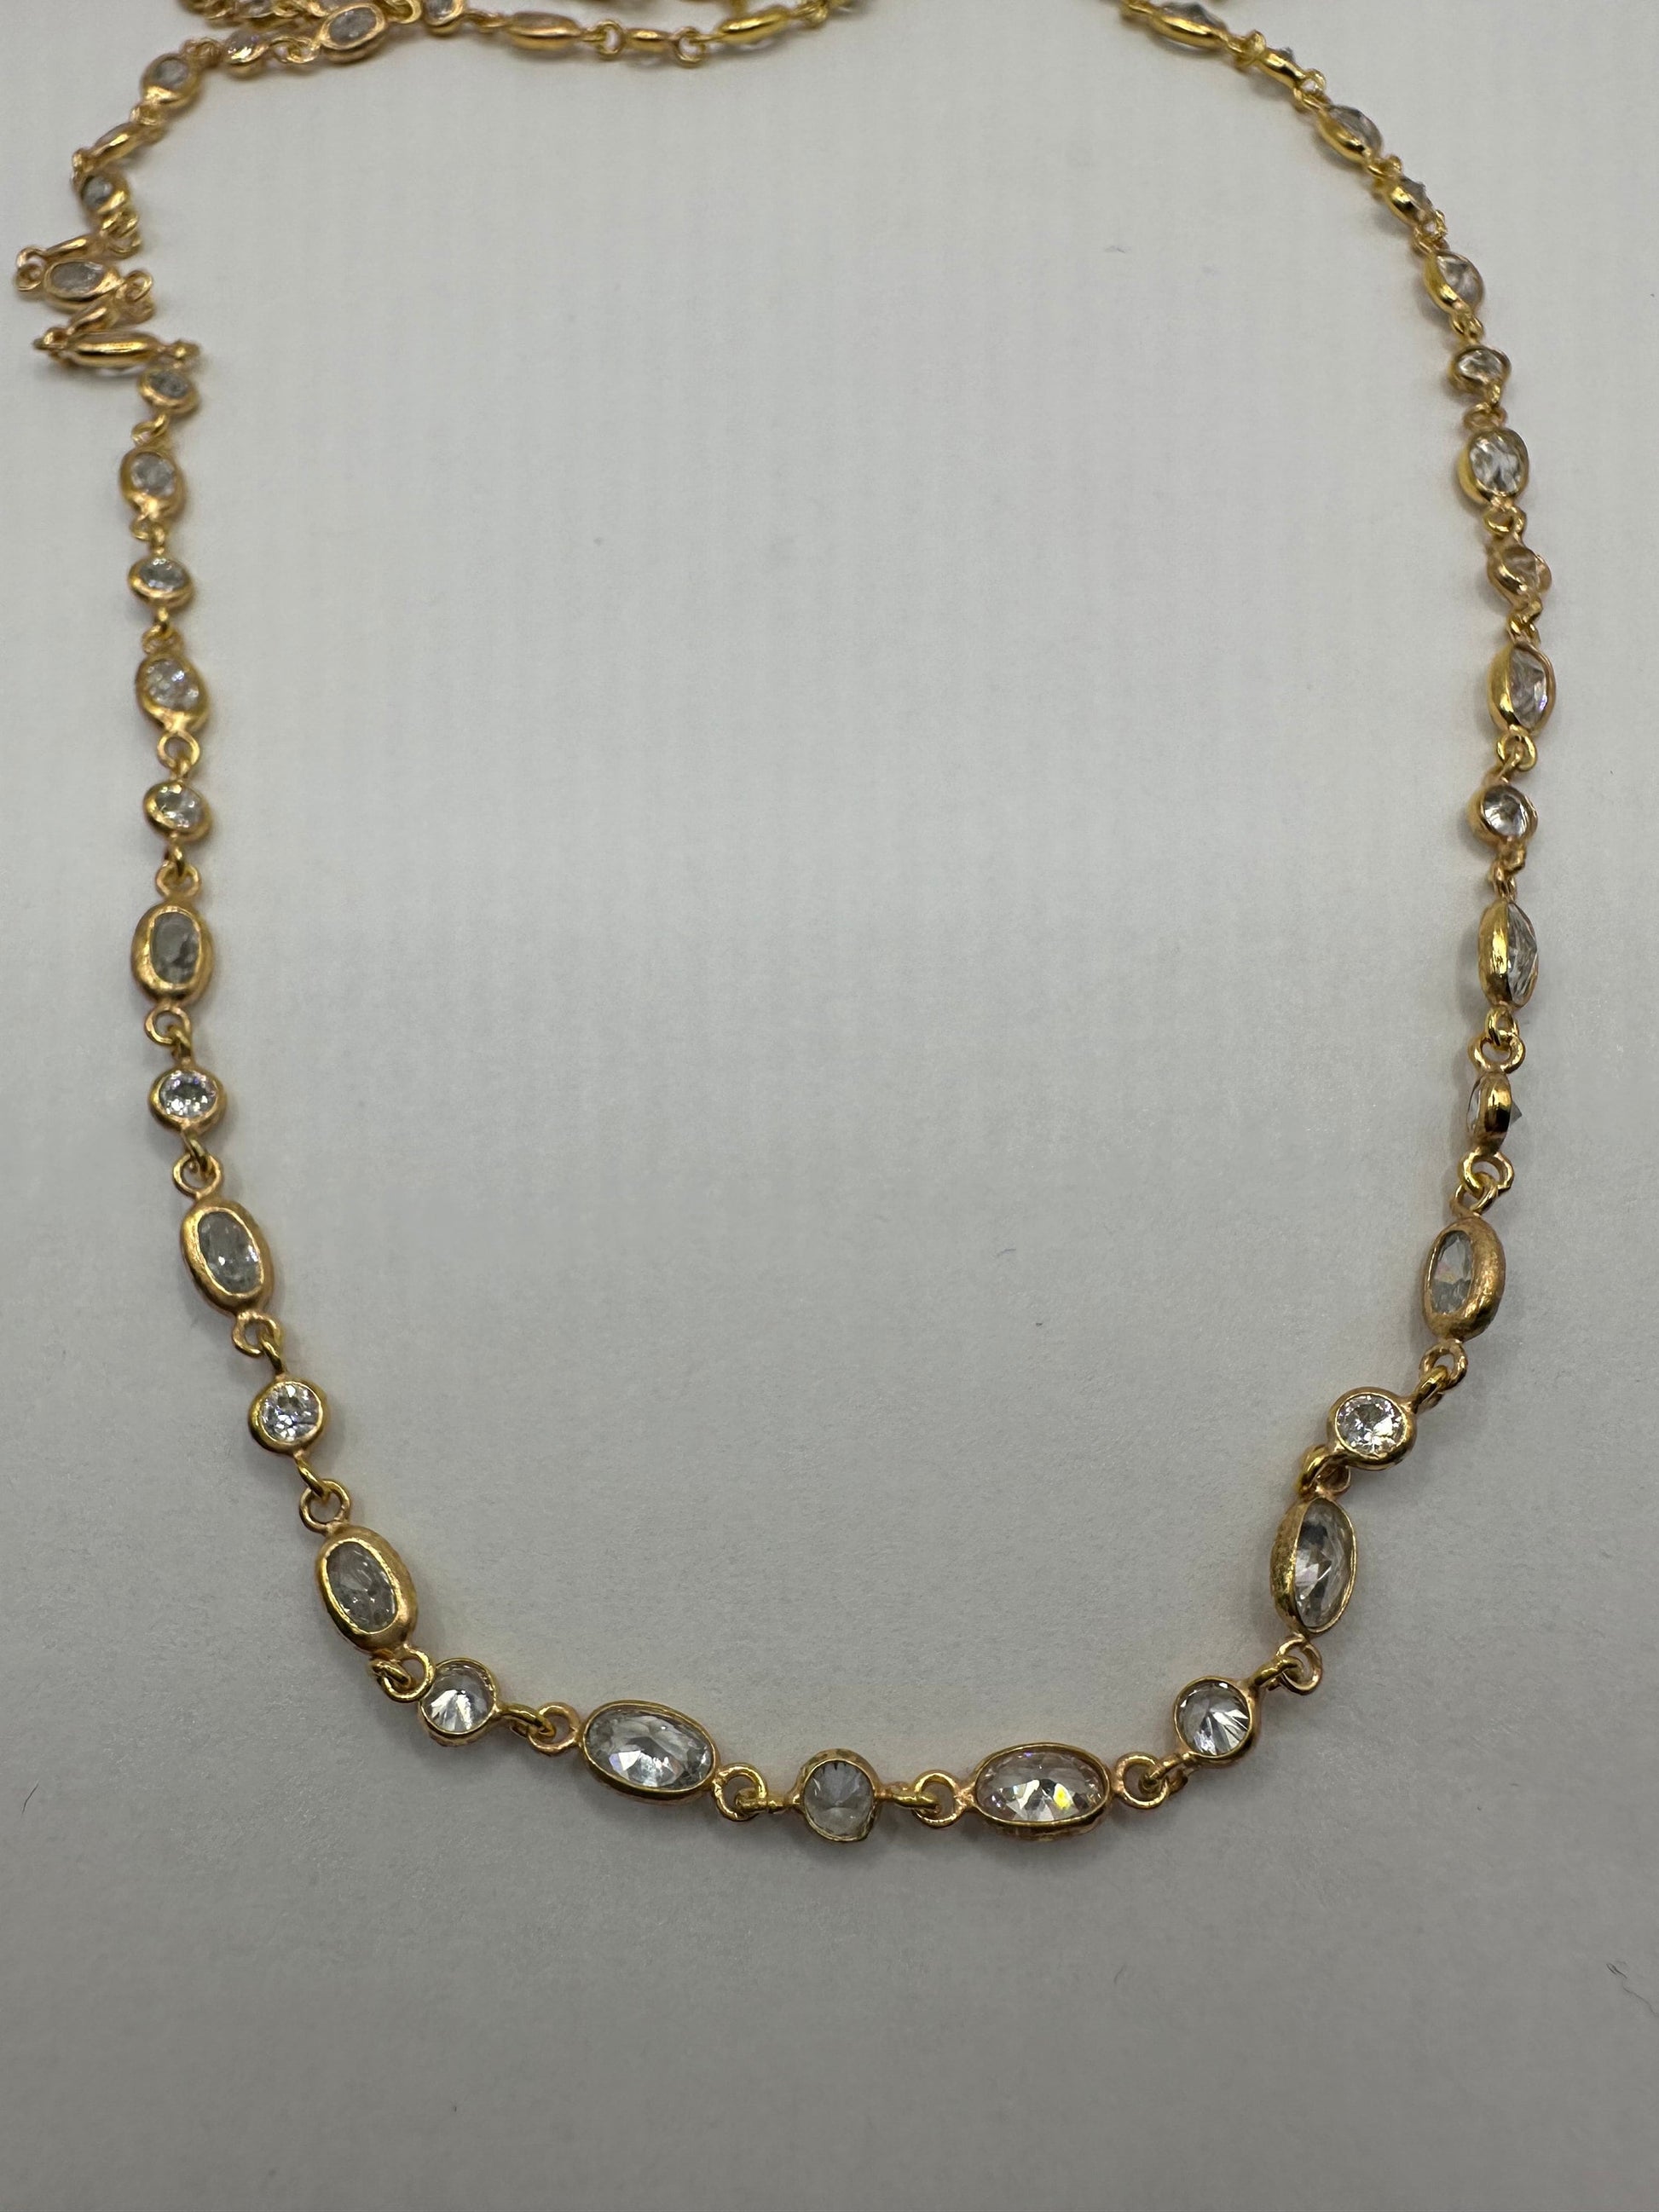 Vintage Crystal Cubic Zirconia Choker Necklace Golden 925 Sterling Silver 33 inches